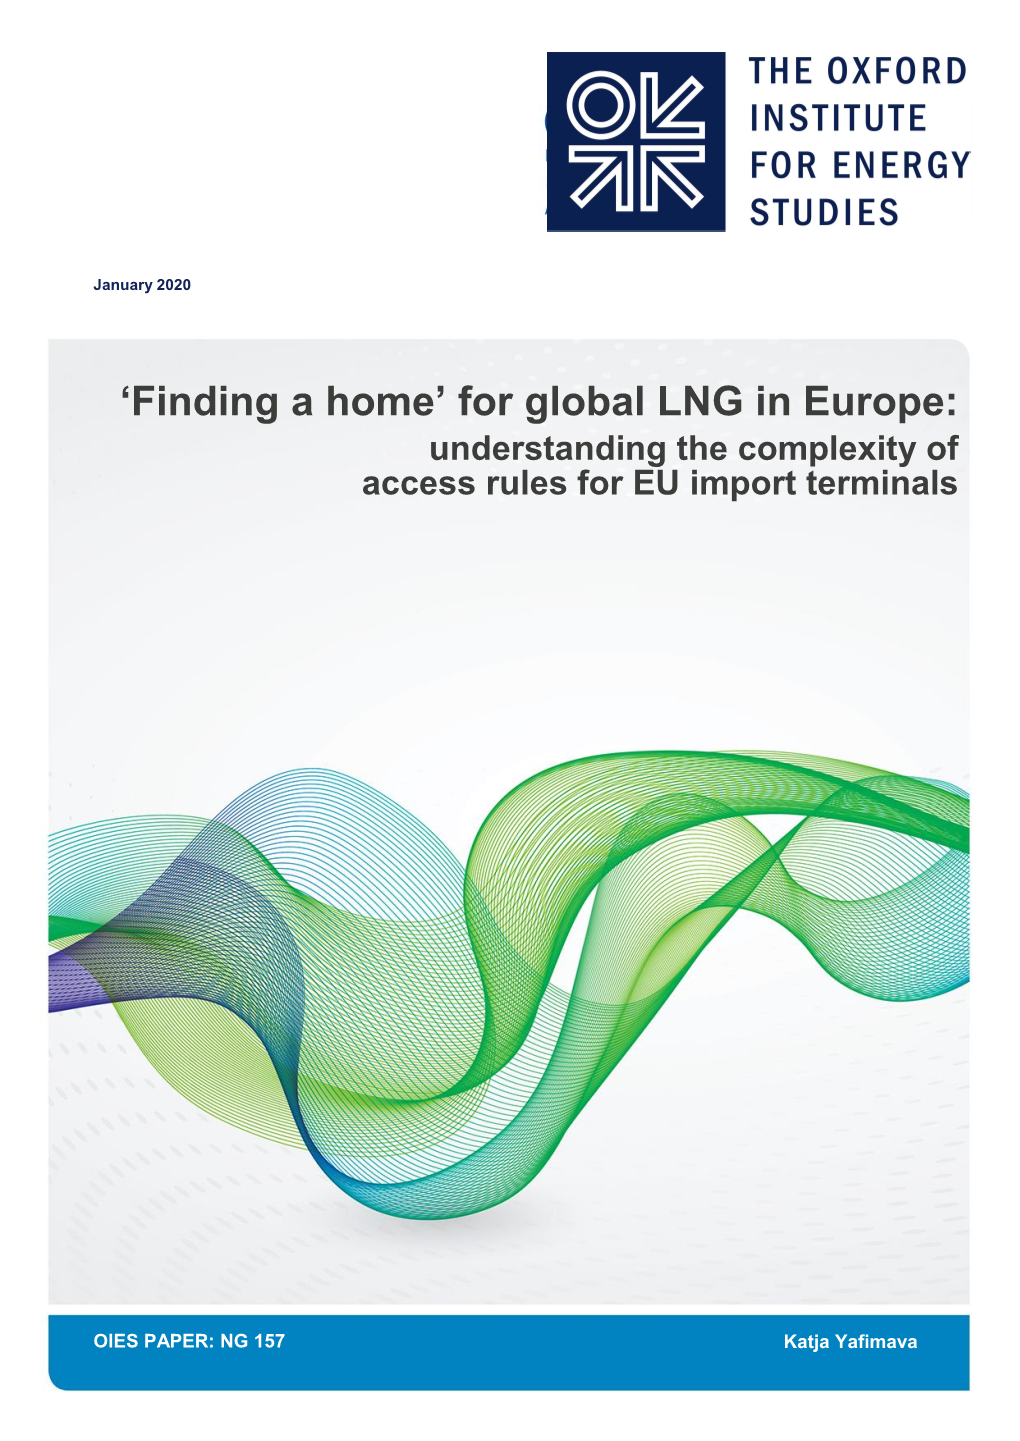 For Global LNG in Europe: Understanding the Complexity of Access Rules for EU Import Terminals